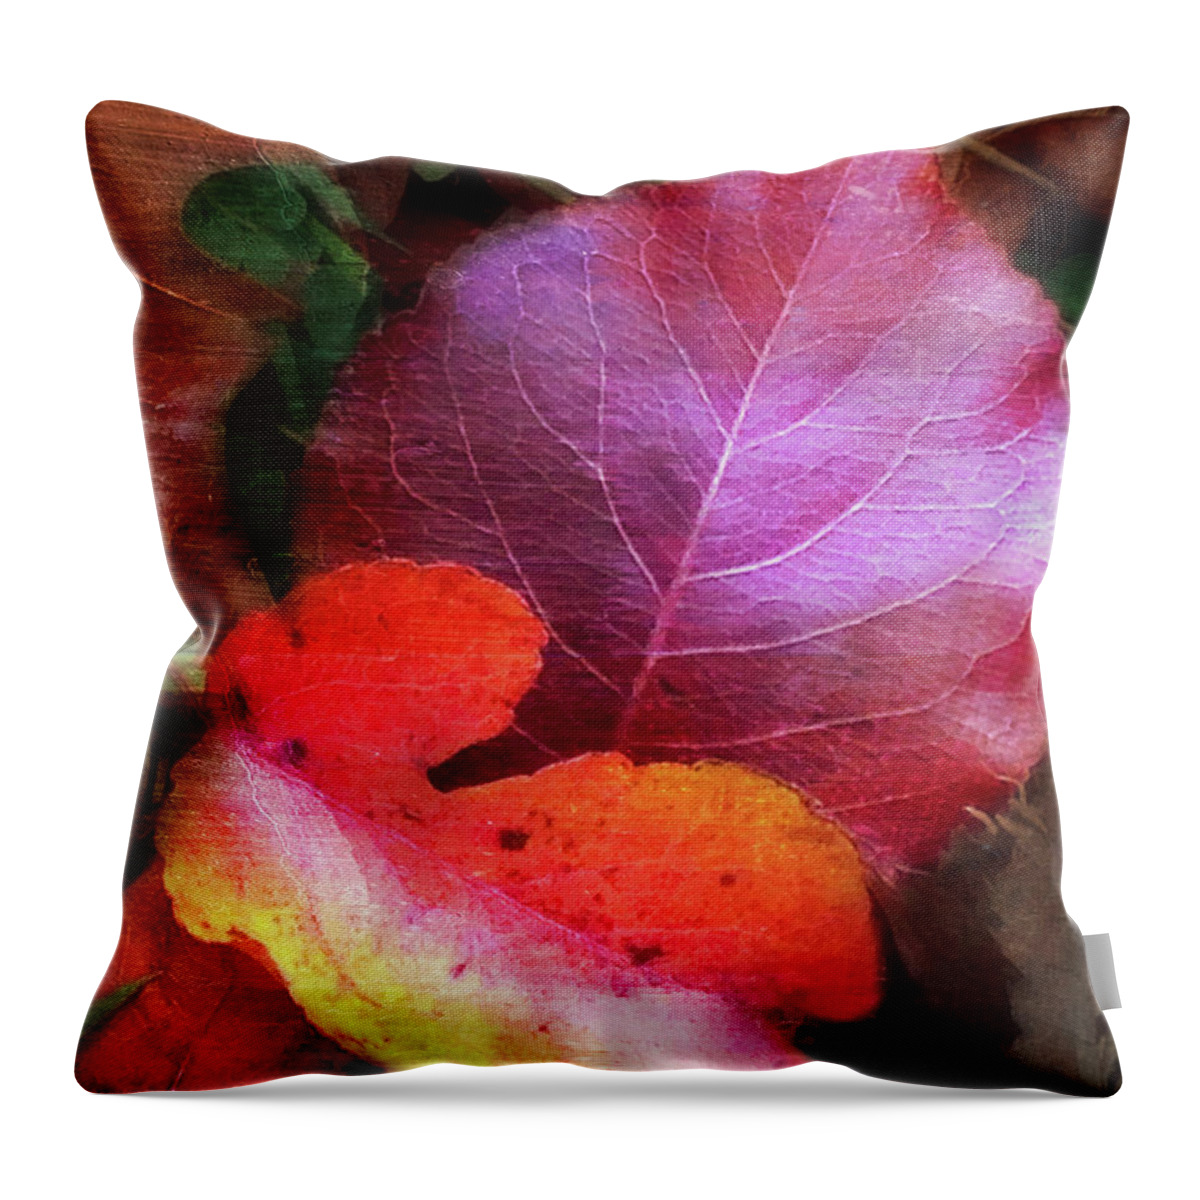 Autumn Leaves Throw Pillow featuring the photograph Autumn Leaves by Terri Harper